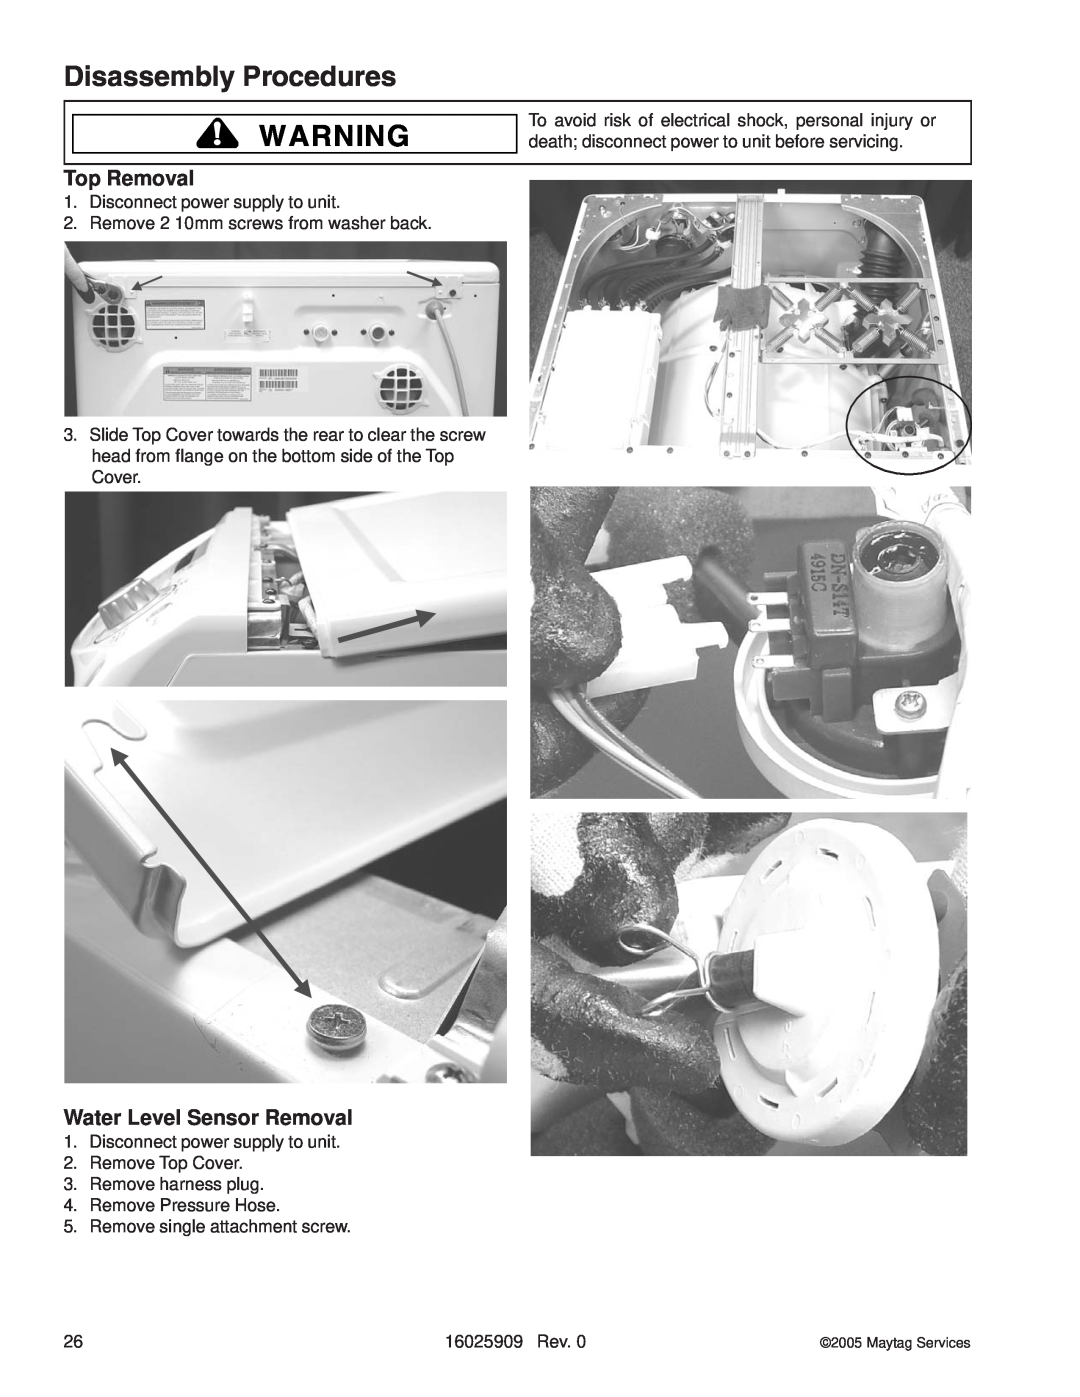 Whirlpool MAH9700AW manual Disassembly Procedures, Top Removal, Water Level Sensor Removal 